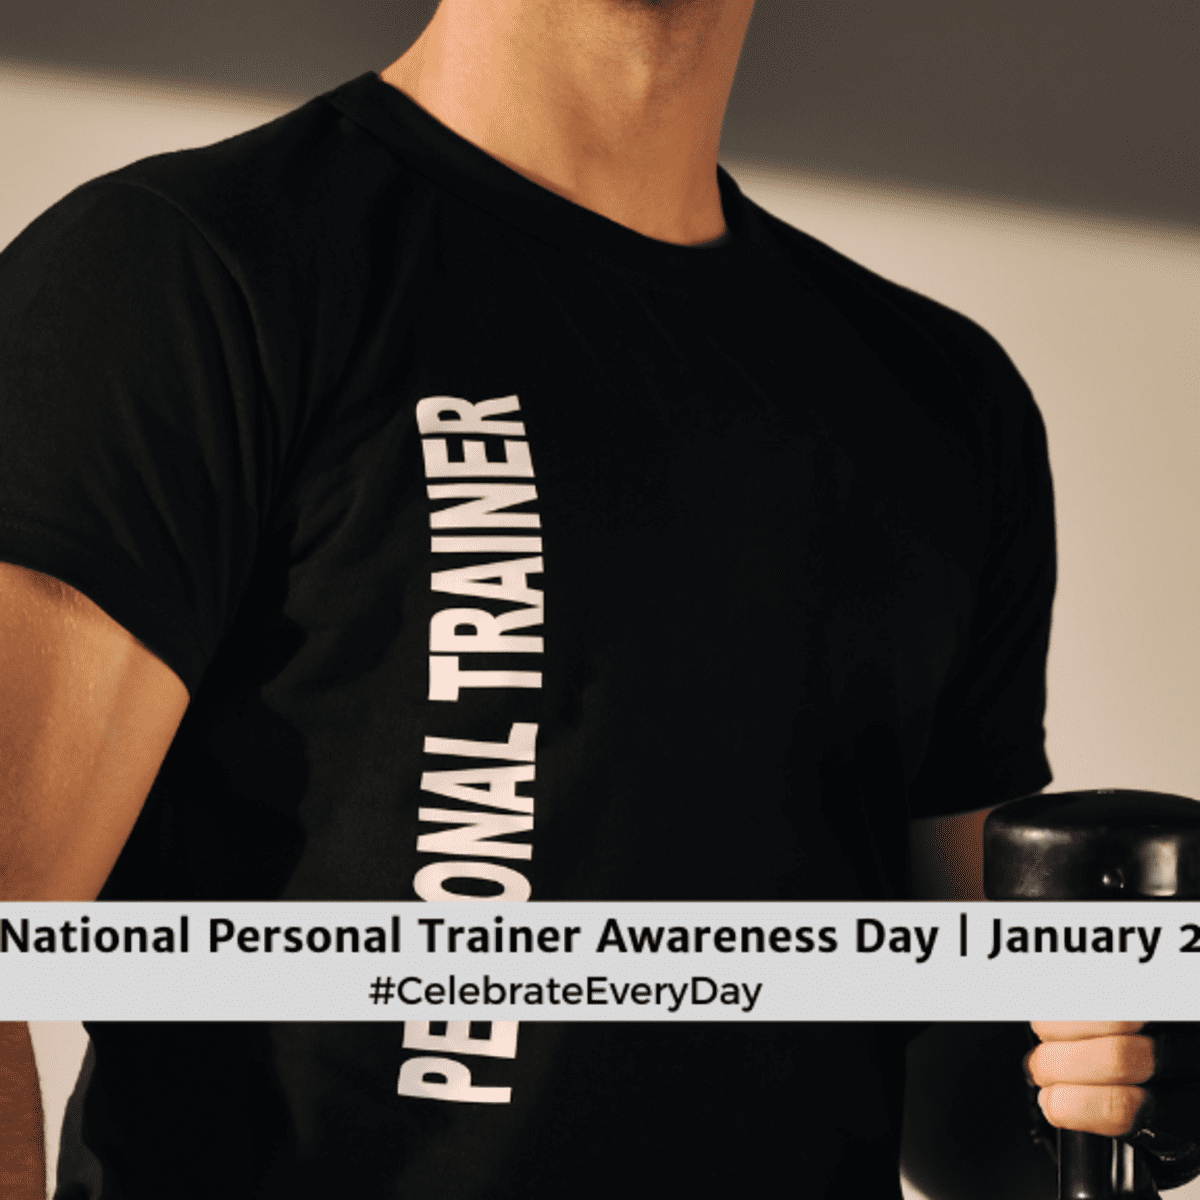 NATIONAL PERSONAL TRAINER AWARENESS DAY - January 2 - National Day